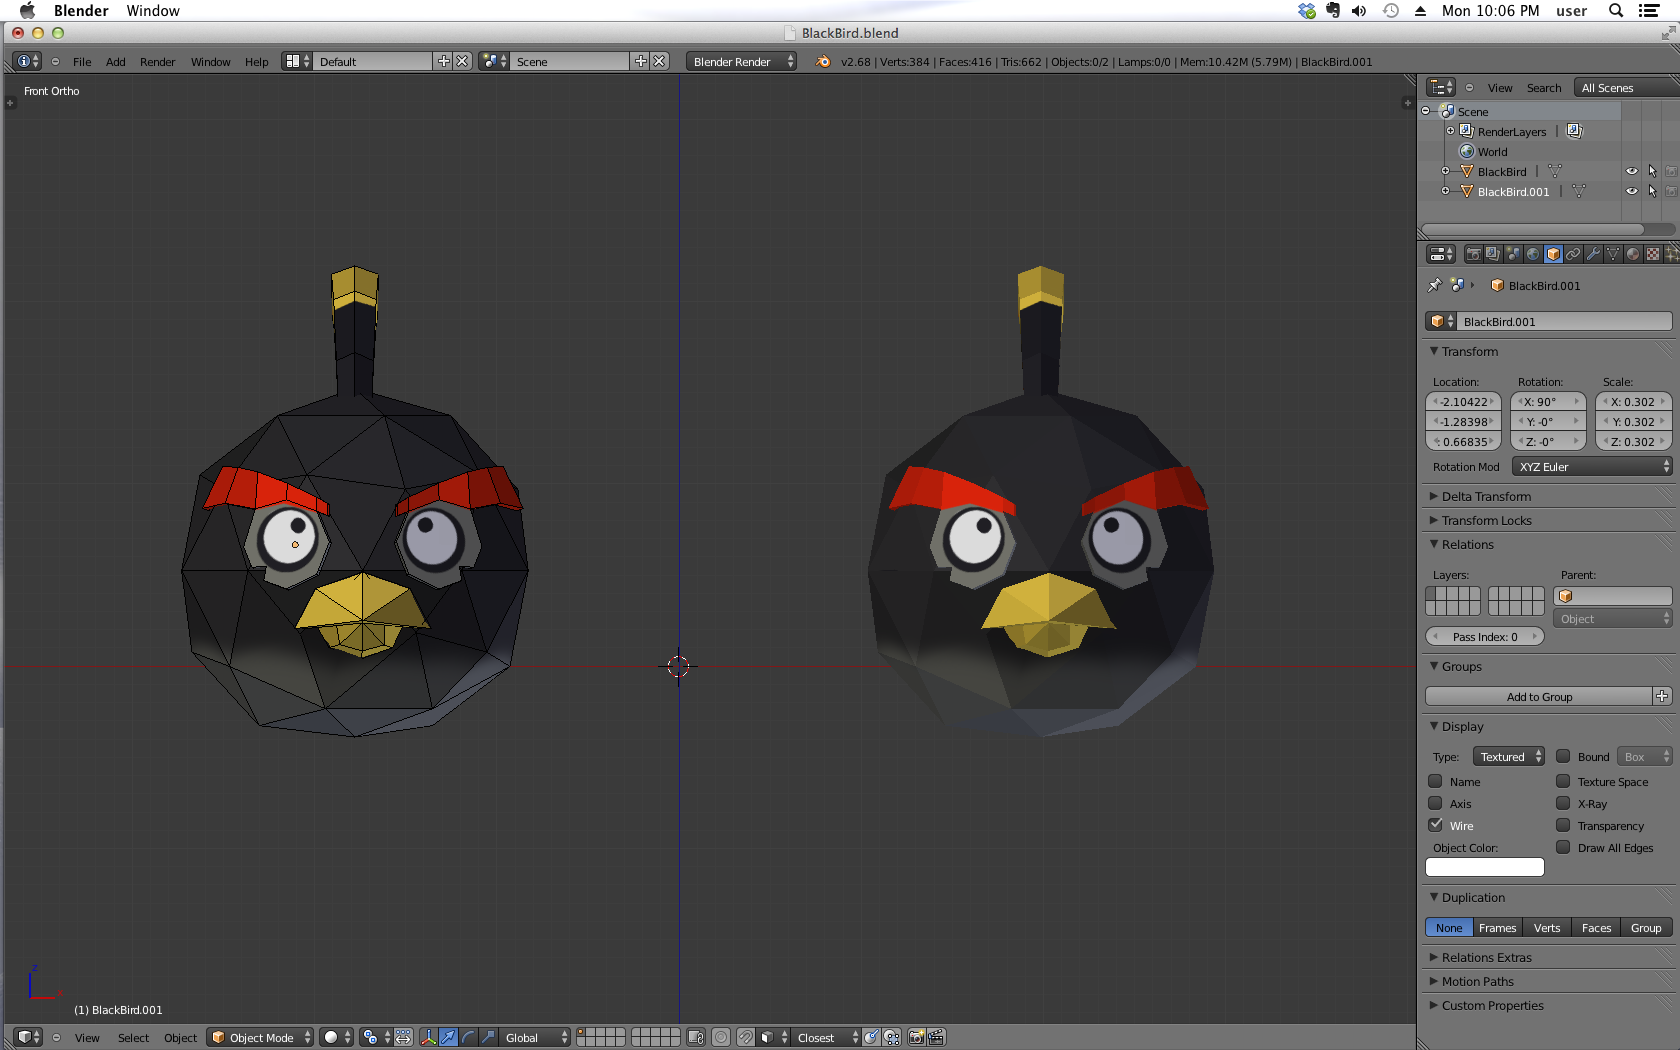 how to draw angry birds space blackbird step by step